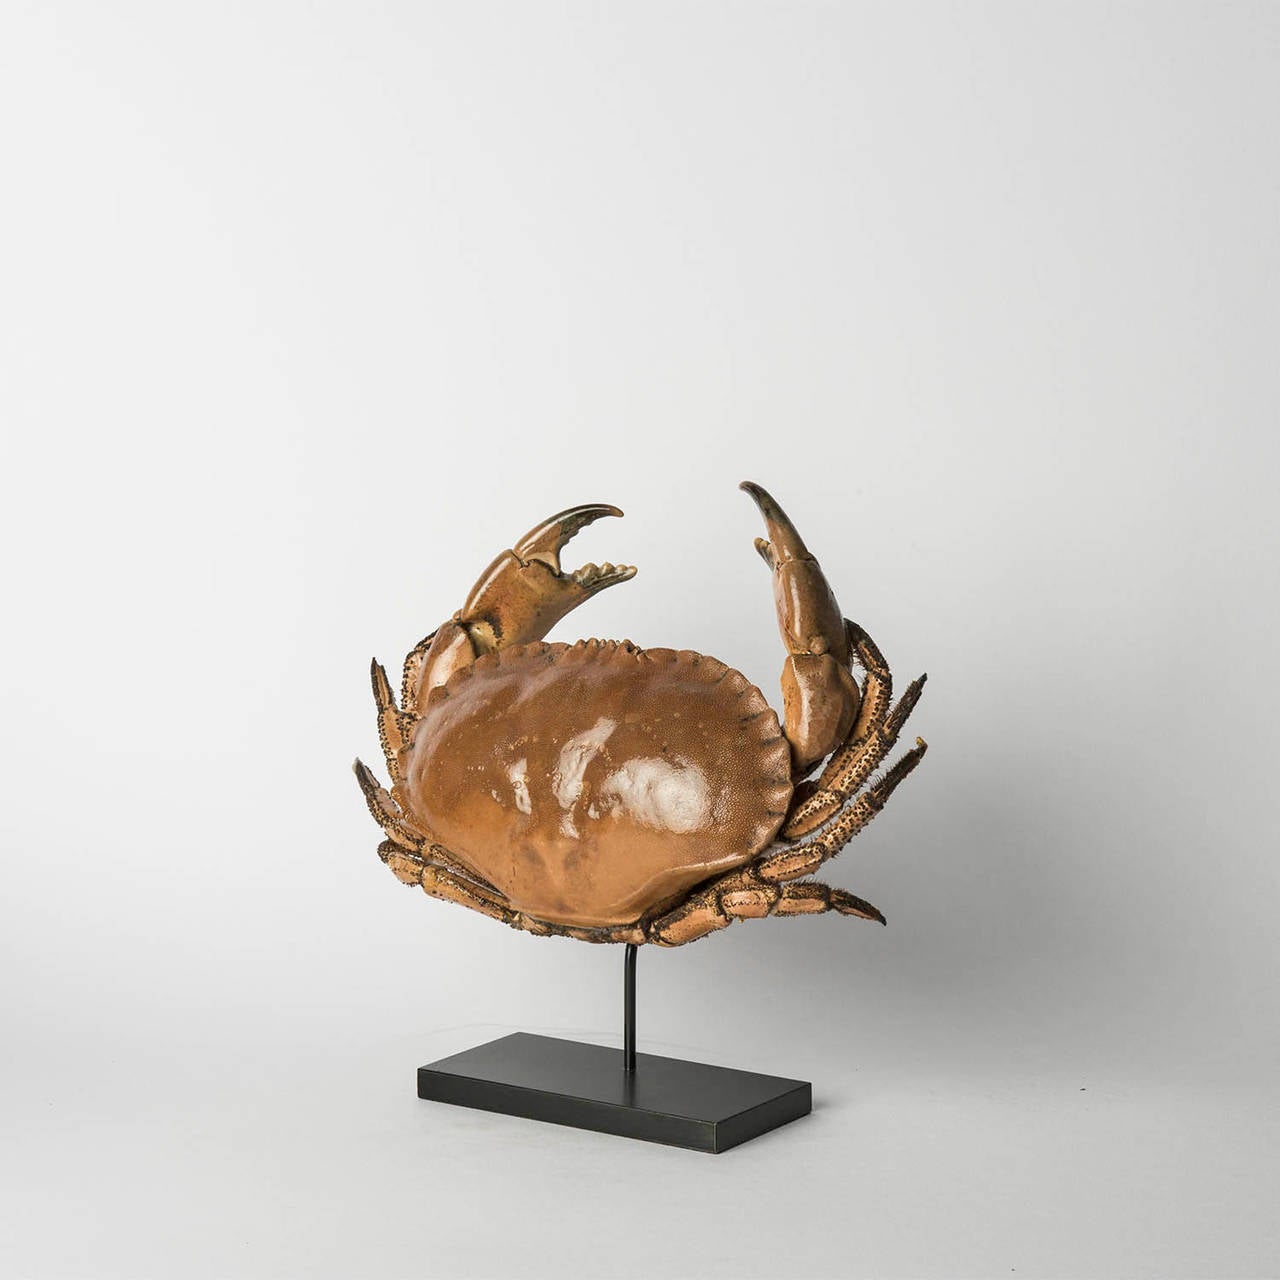 Mounted sea crab cancer pagurus

Crabs are decapod crustaceans (10 –legged) that live in all world’s oceans. They are generally covered with a thick exoskeleton and a single pair of claws. From cartoons it is generally known that crabs walk